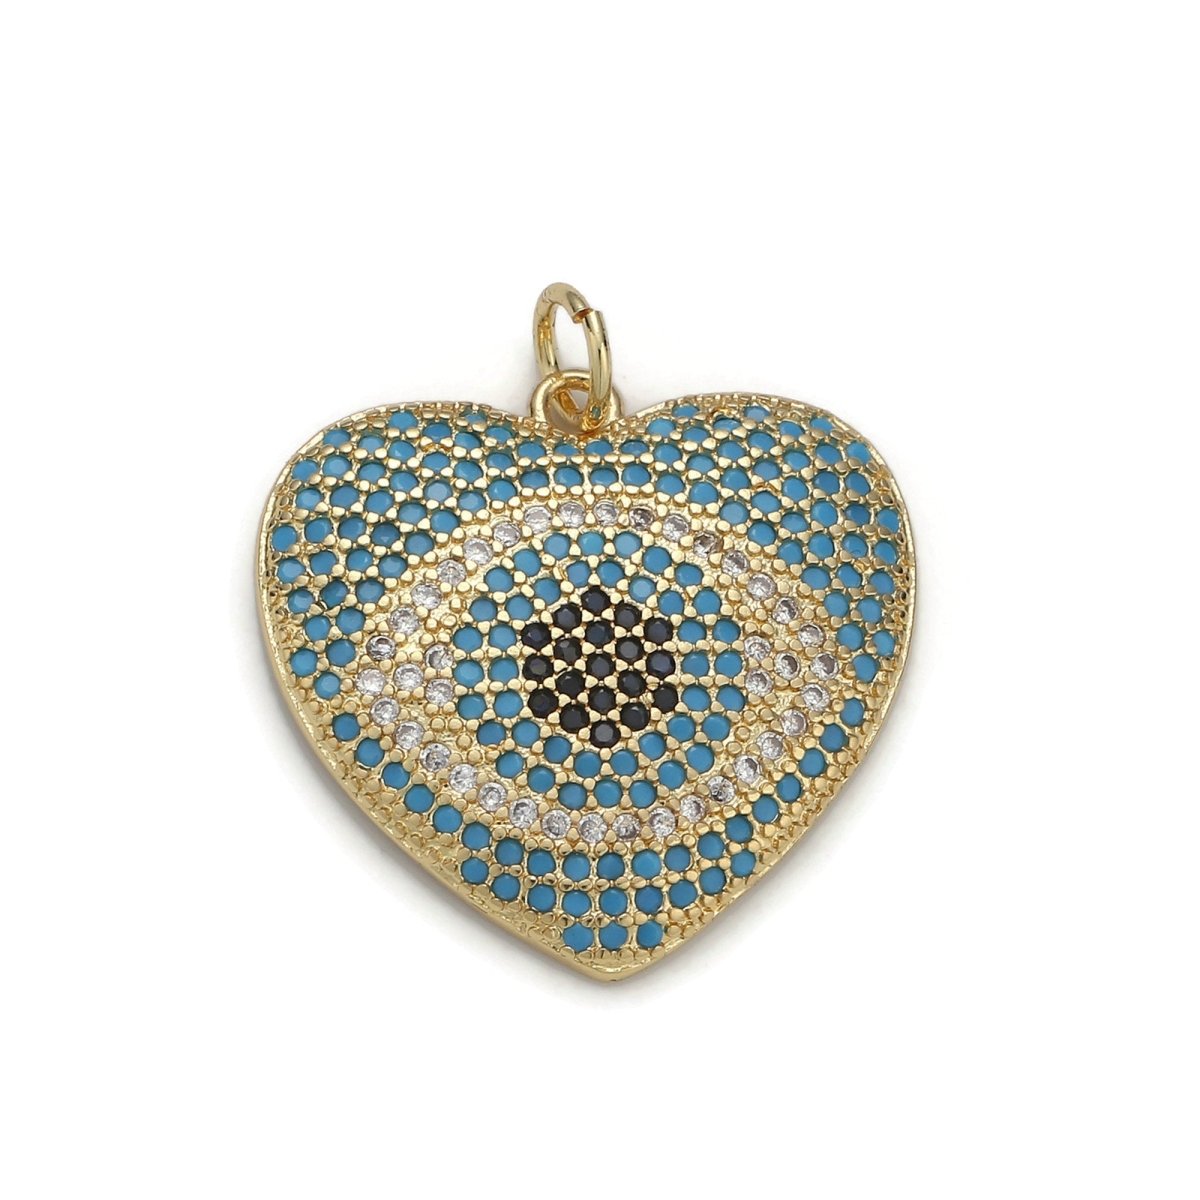 24k Gold Filled Micro Pave CZ Heart Pendant Charm, Eye in Heart Micro Pave CZ Pendant Charm, Gold Filled Pendant, For DIY Jewelry D-035 - DLUXCA